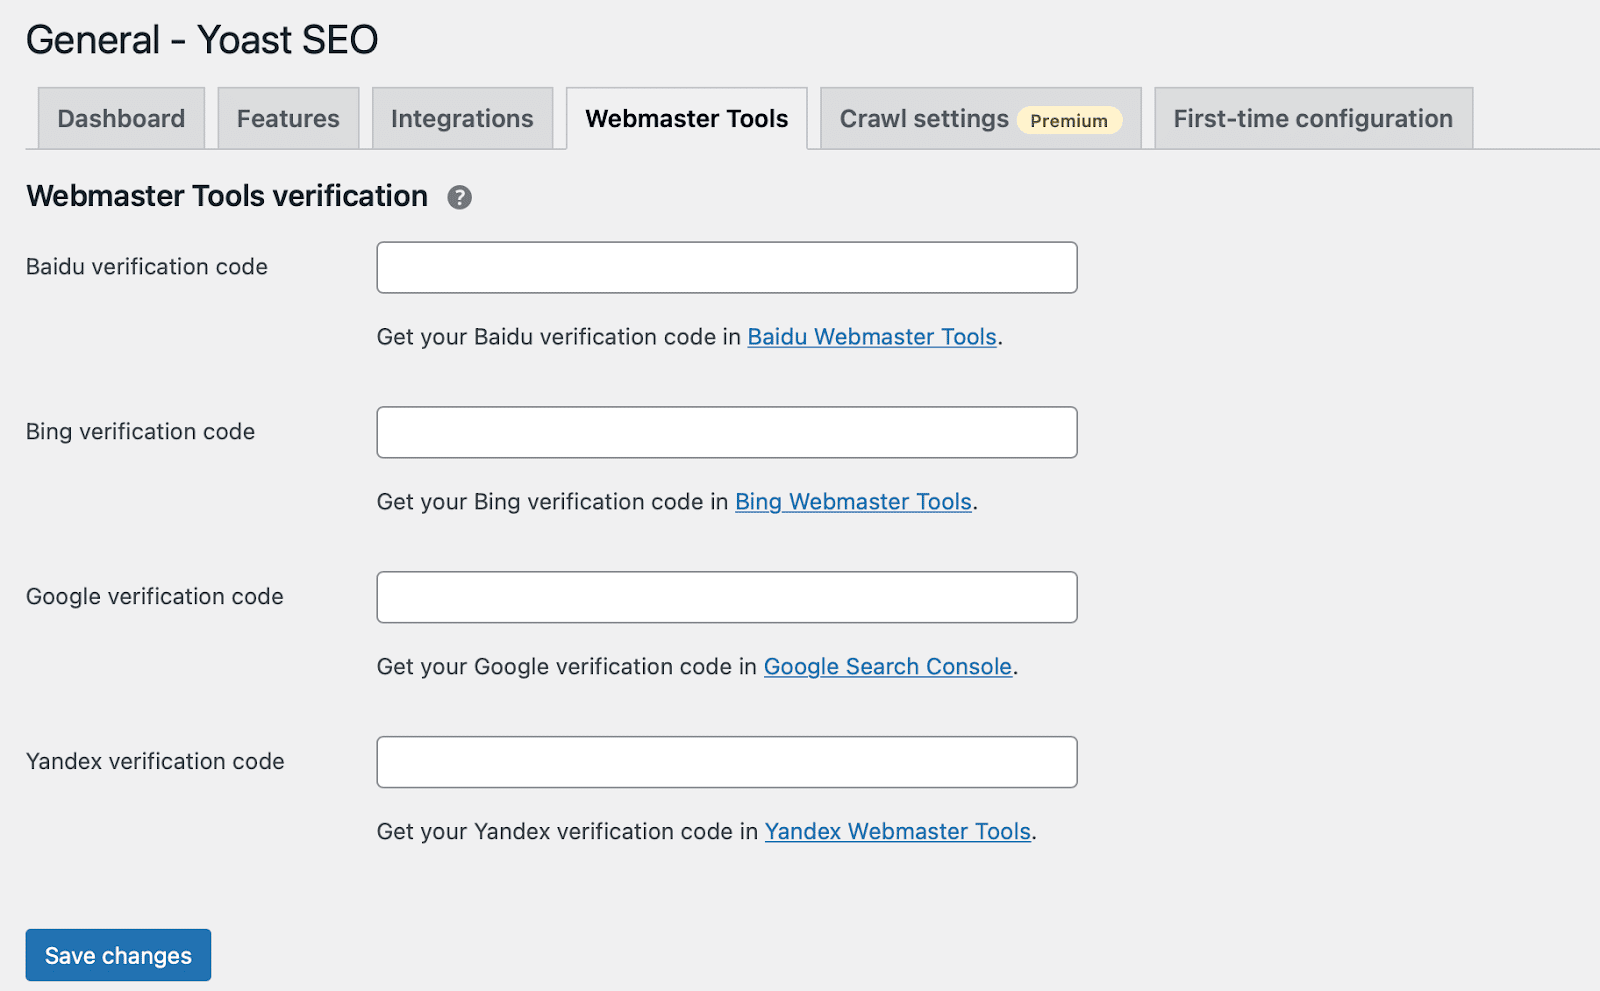 This area helps you connect to various search engine tools